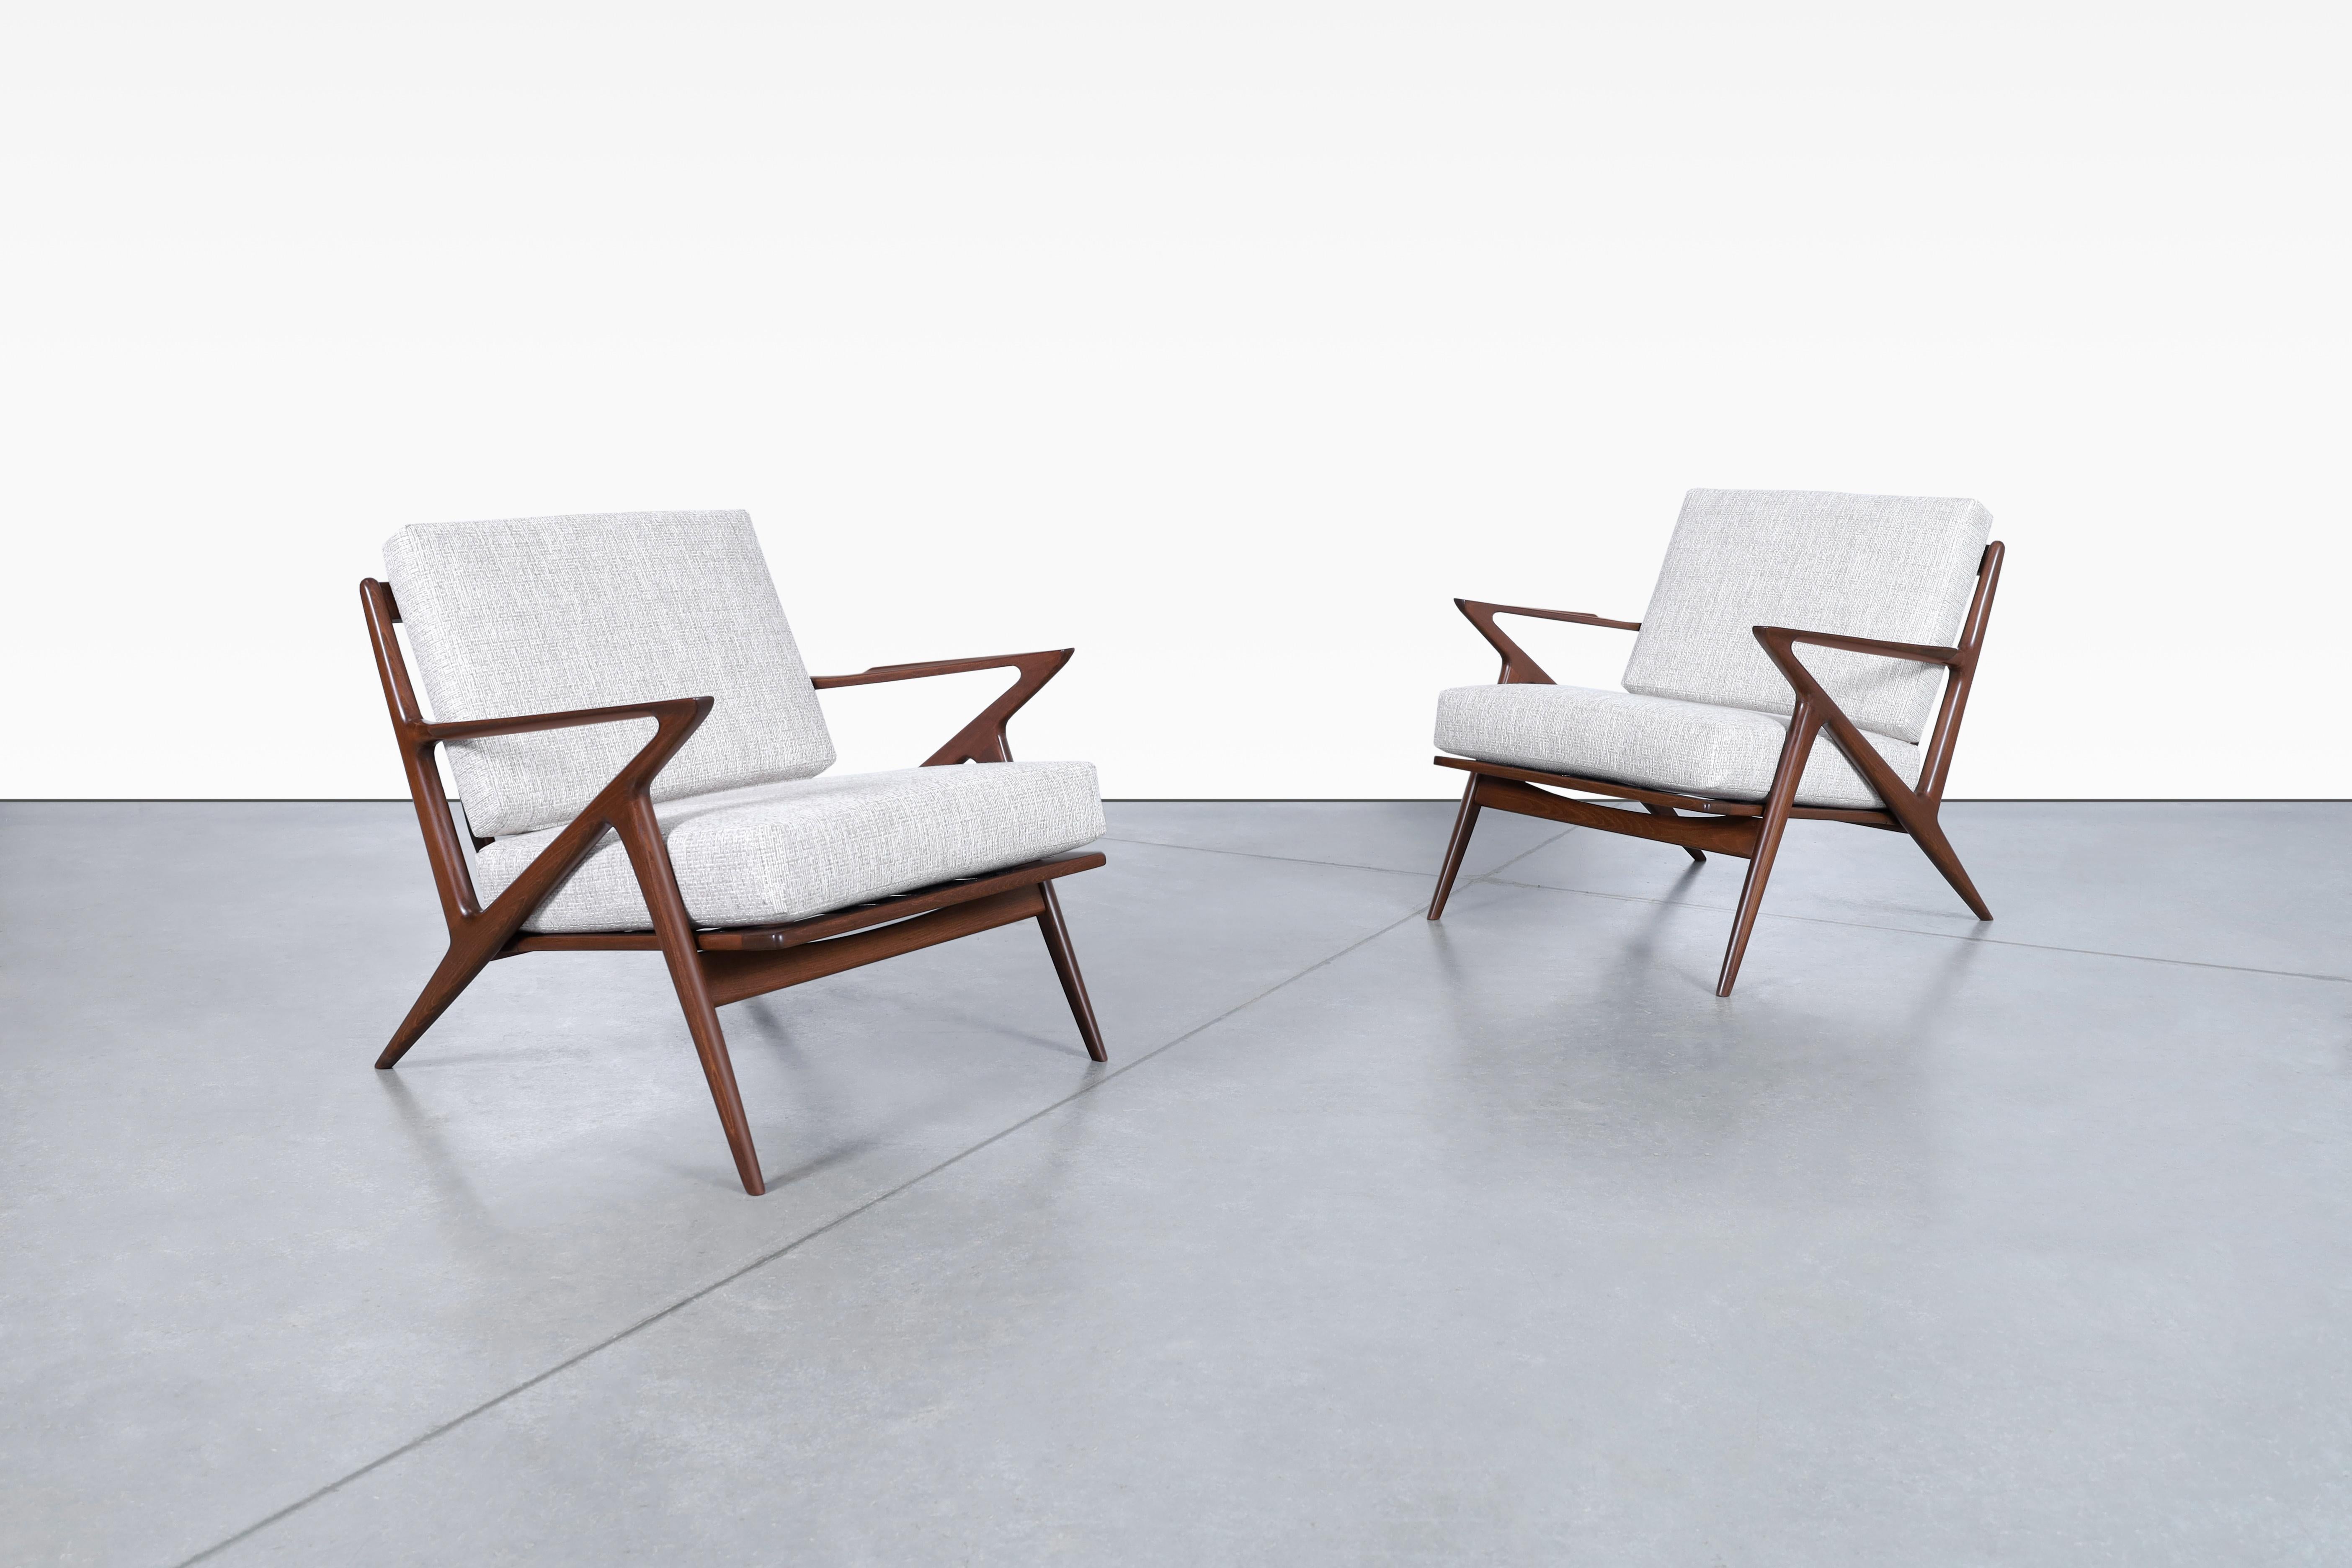 Beautiful Danish modern walnut lounge chairs designed by Poul Jensen for Selig, in Denmark, circa 1960’s. Known as the “Z” chair for its exclusive armrests that connect to the legs and give the illusion of a letter Z. These chairs stand out for the